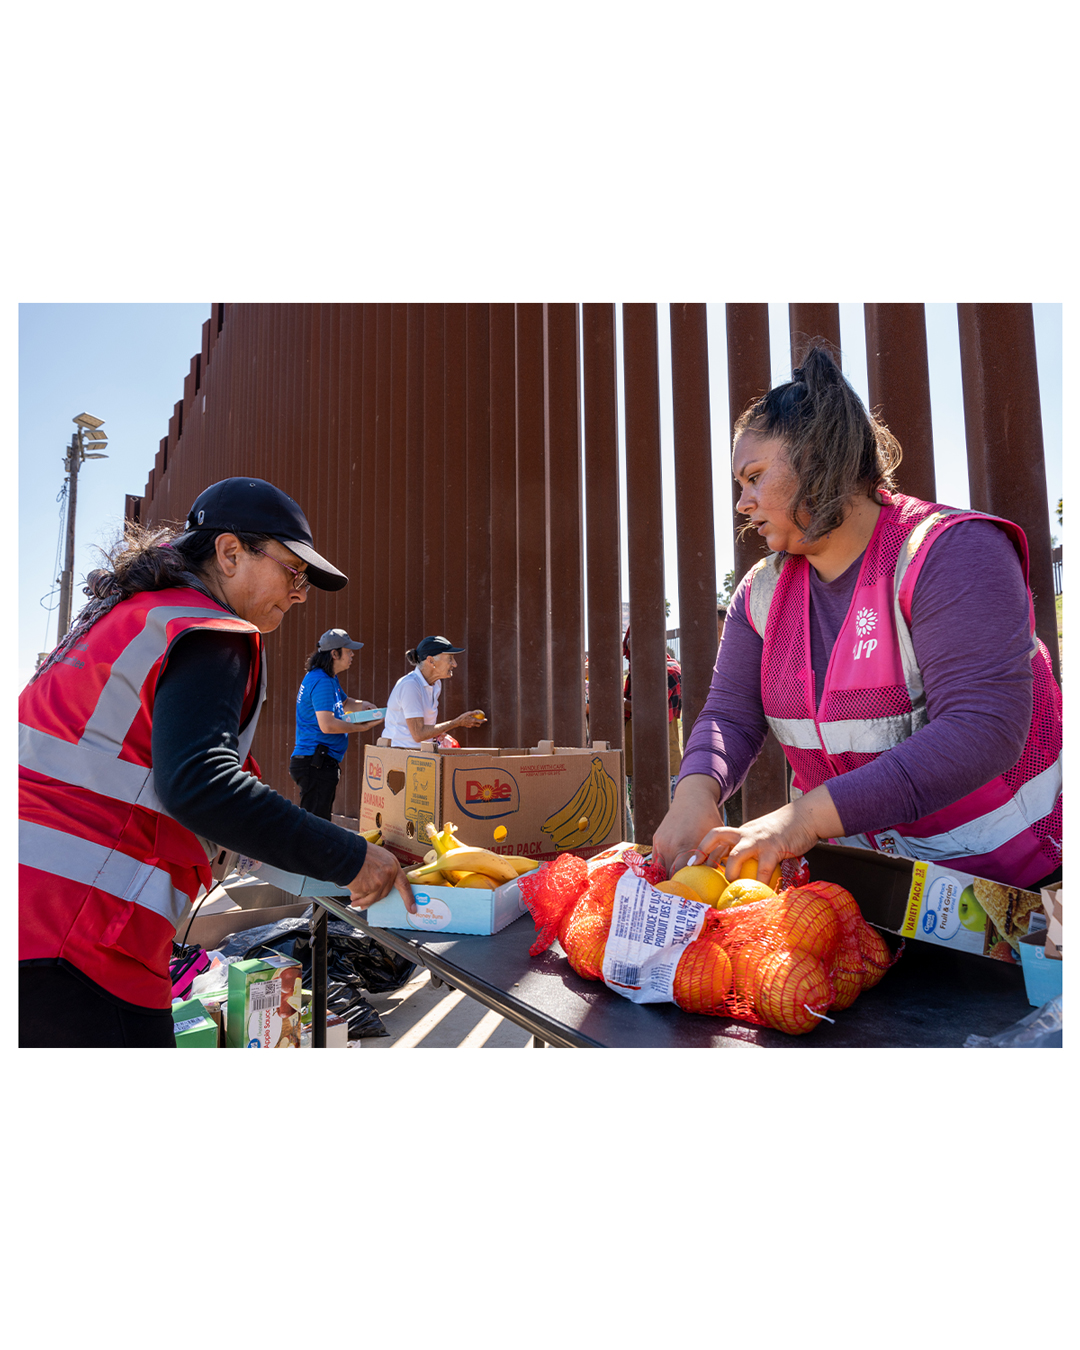 Two volunteers sort through fresh produce on one side of the wall. Behind them, two other volunteers speak to migrants through the slats in the wall, handing out oranges and bananas.